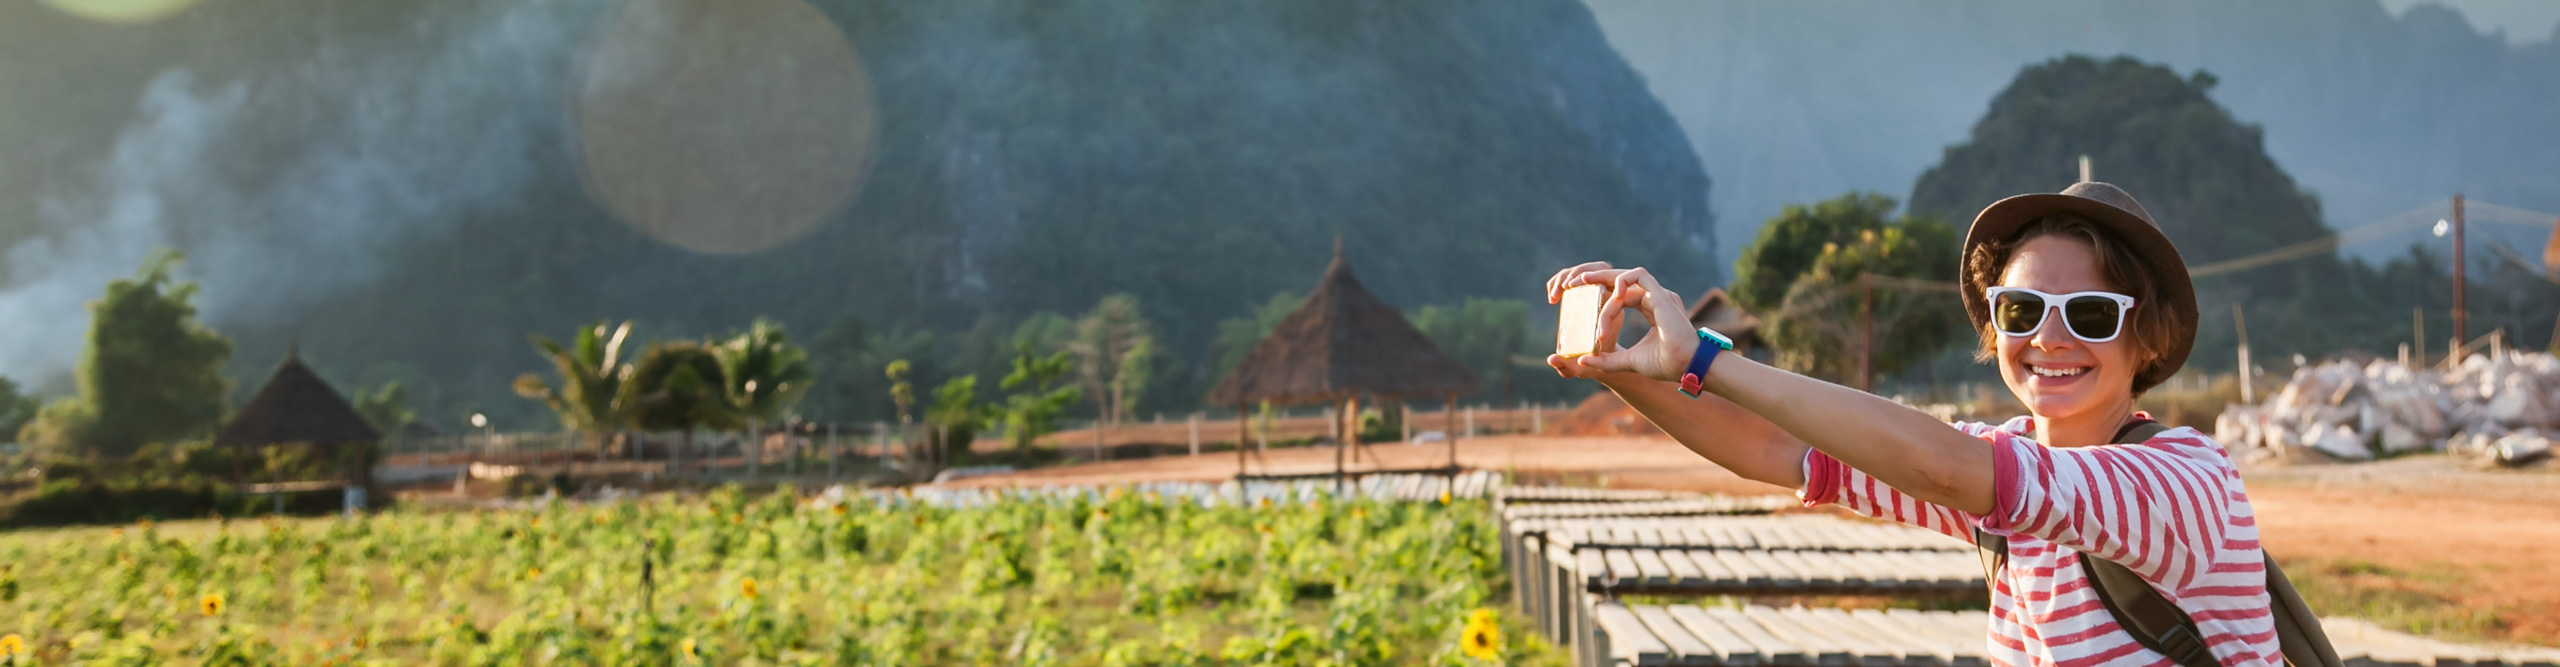 young woman photos on a mobile phone landscape in Laos, with mountains in the background 